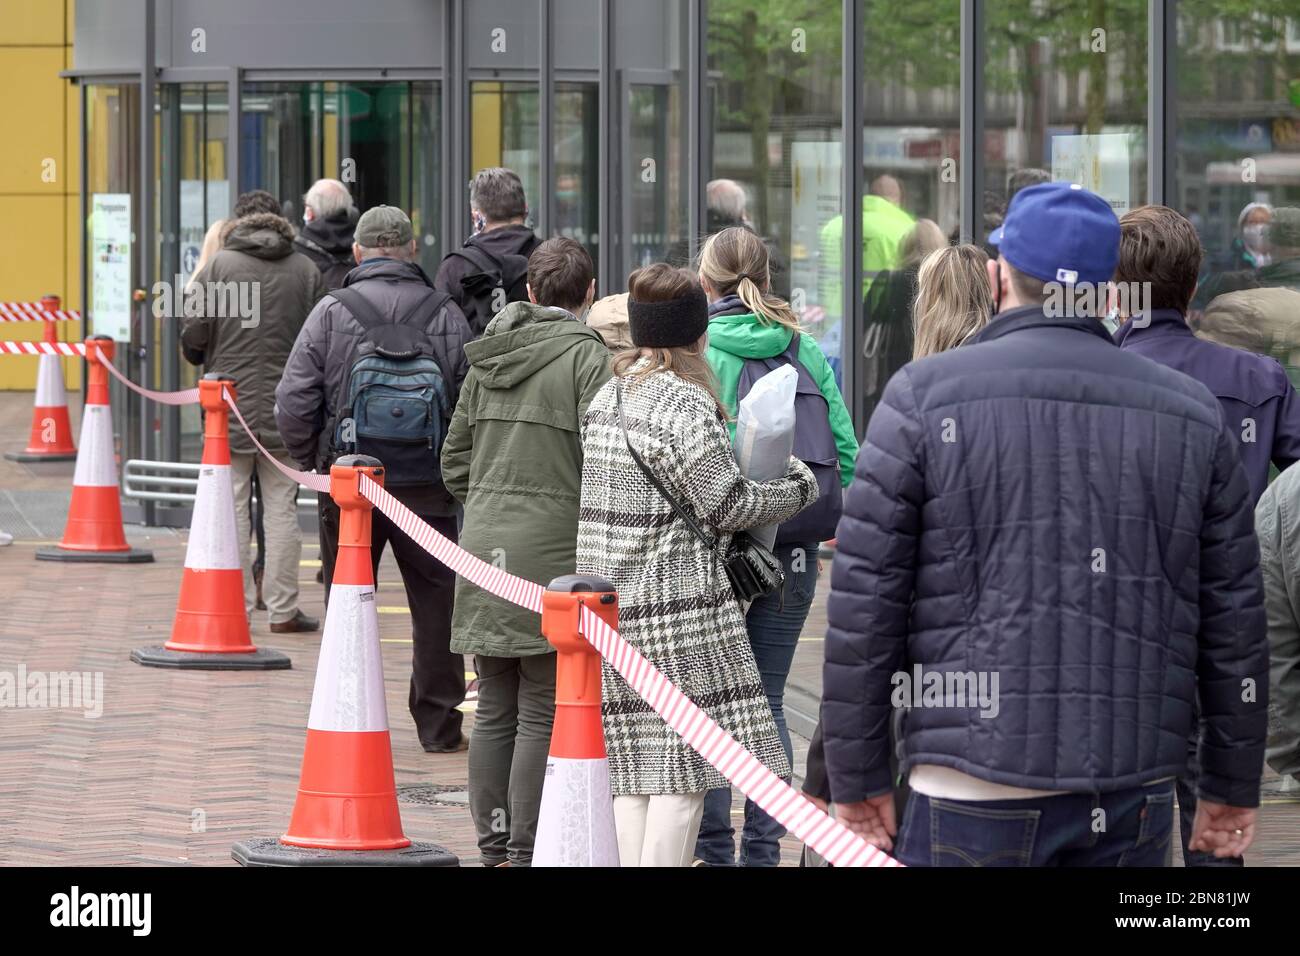 Hamburg, Germany. 13th May, 2020. Customers walk behind red and white barriers to the Ikea branch in Altona. The furniture store in Hamburg-Altona is reopened today after closing due to the corona epidemic. Distance regulations and a comprehensive safety and hygiene concept apply. Credit: Bodo Marks/dpa/Alamy Live News Stock Photo